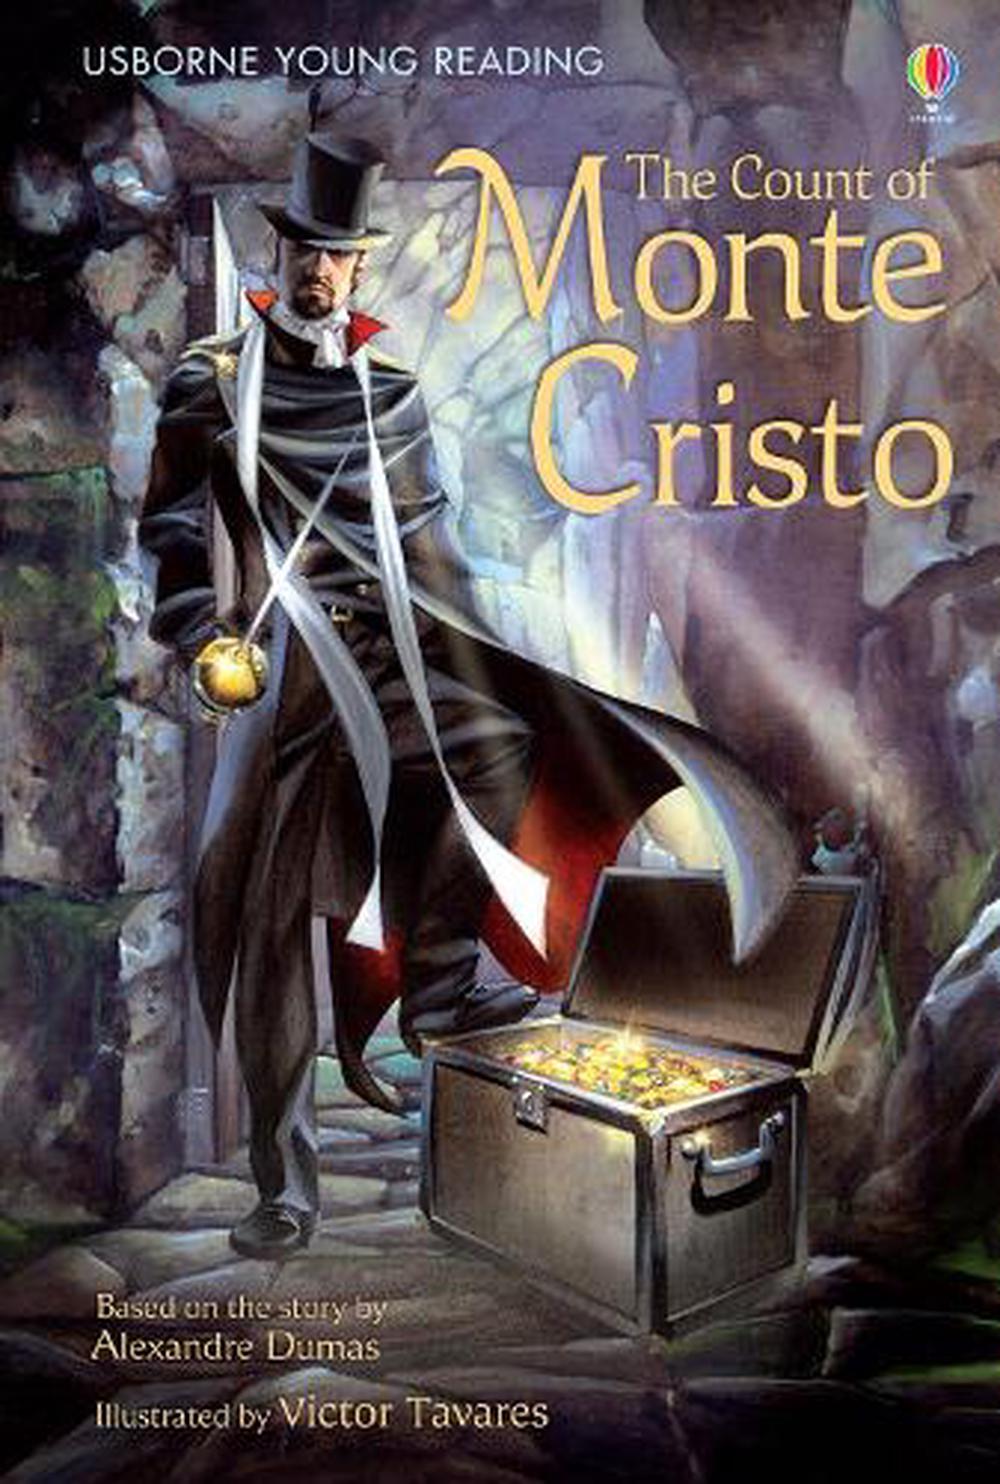 book review of the count of monte cristo